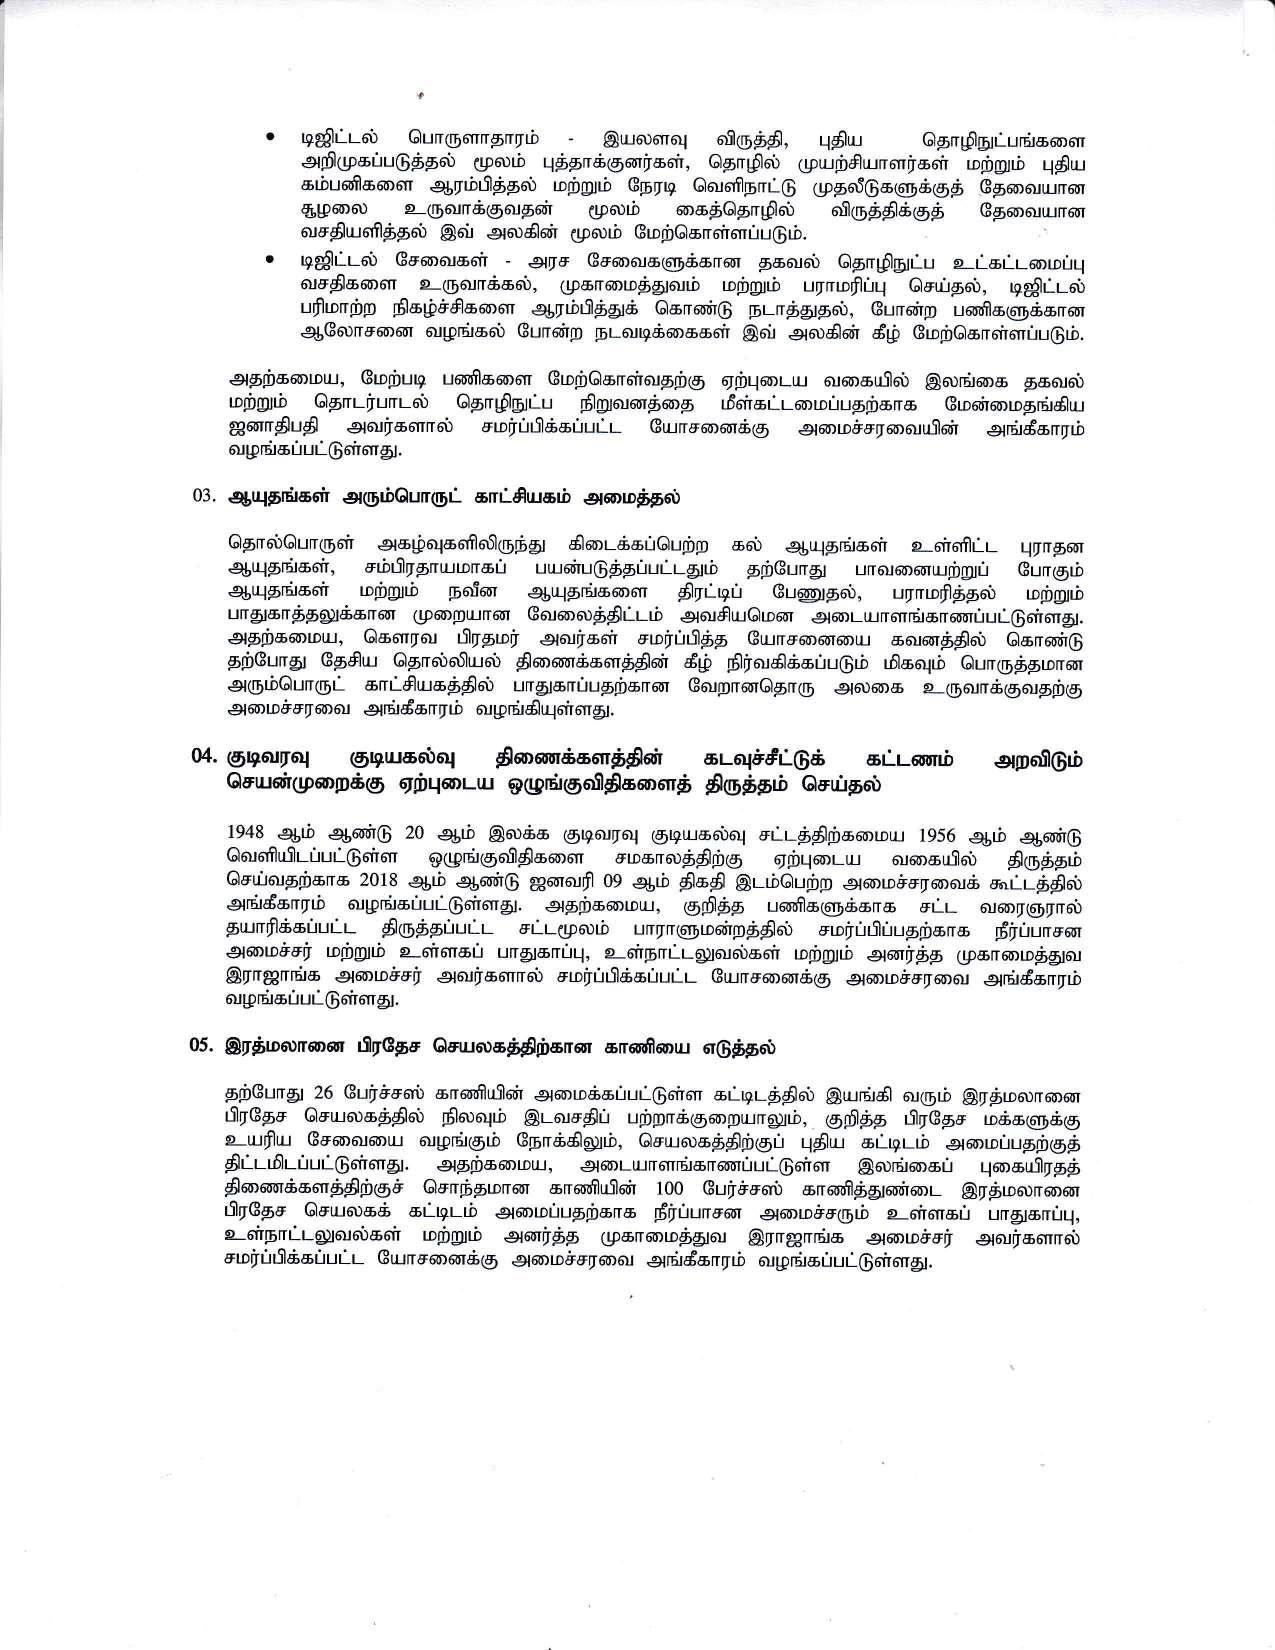 Cabinet Desion on 16.11.2020 Tamil page 002